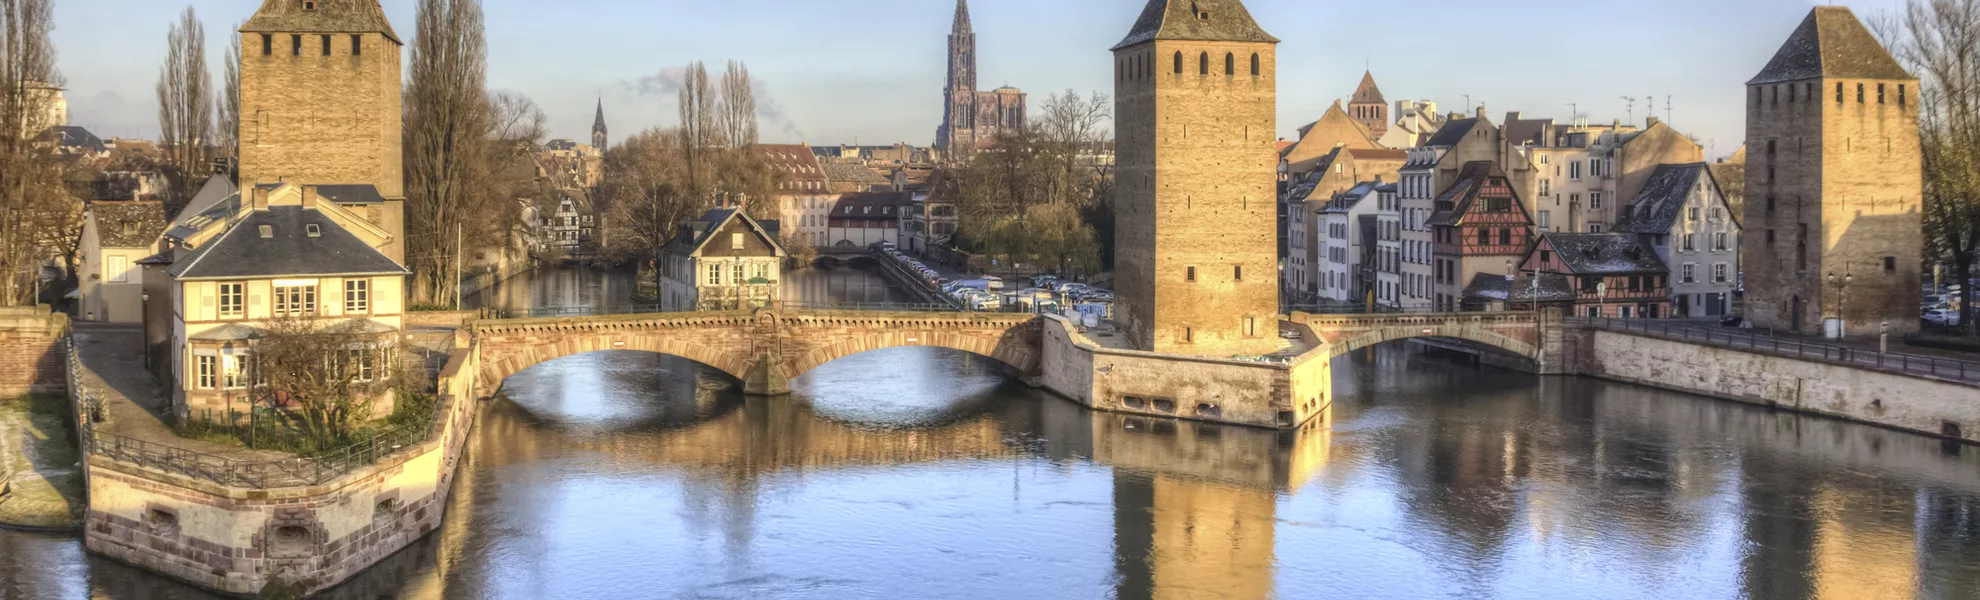 Ponts Couverts, Strasbourg - © shutterstock_224979487